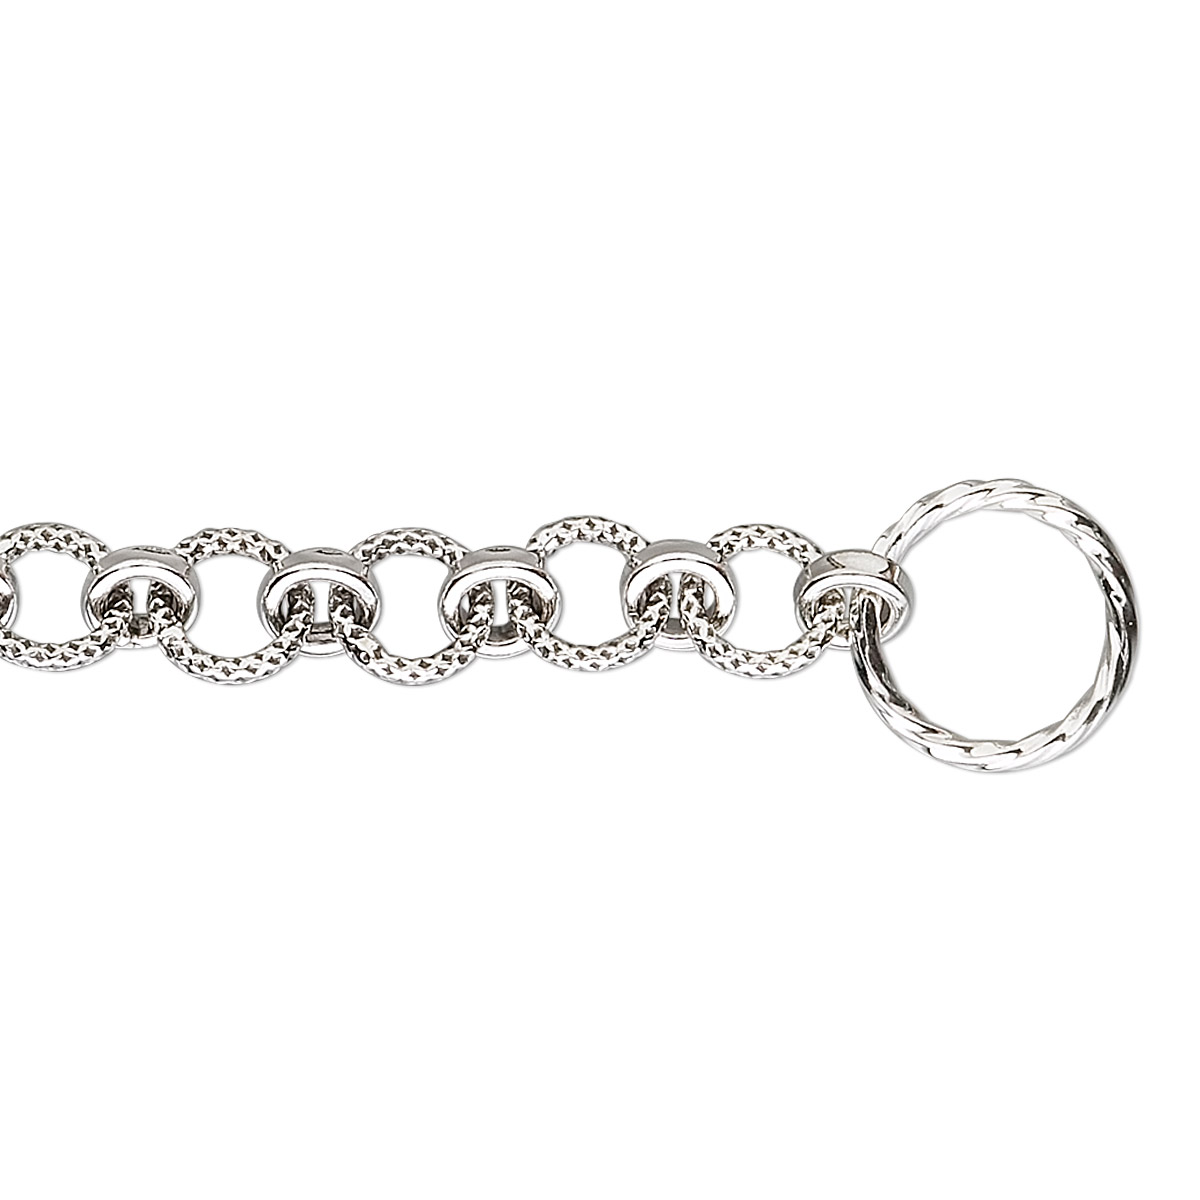 Chain, antiqued sterling silver, 6mm textured round link, 7 inches with ...